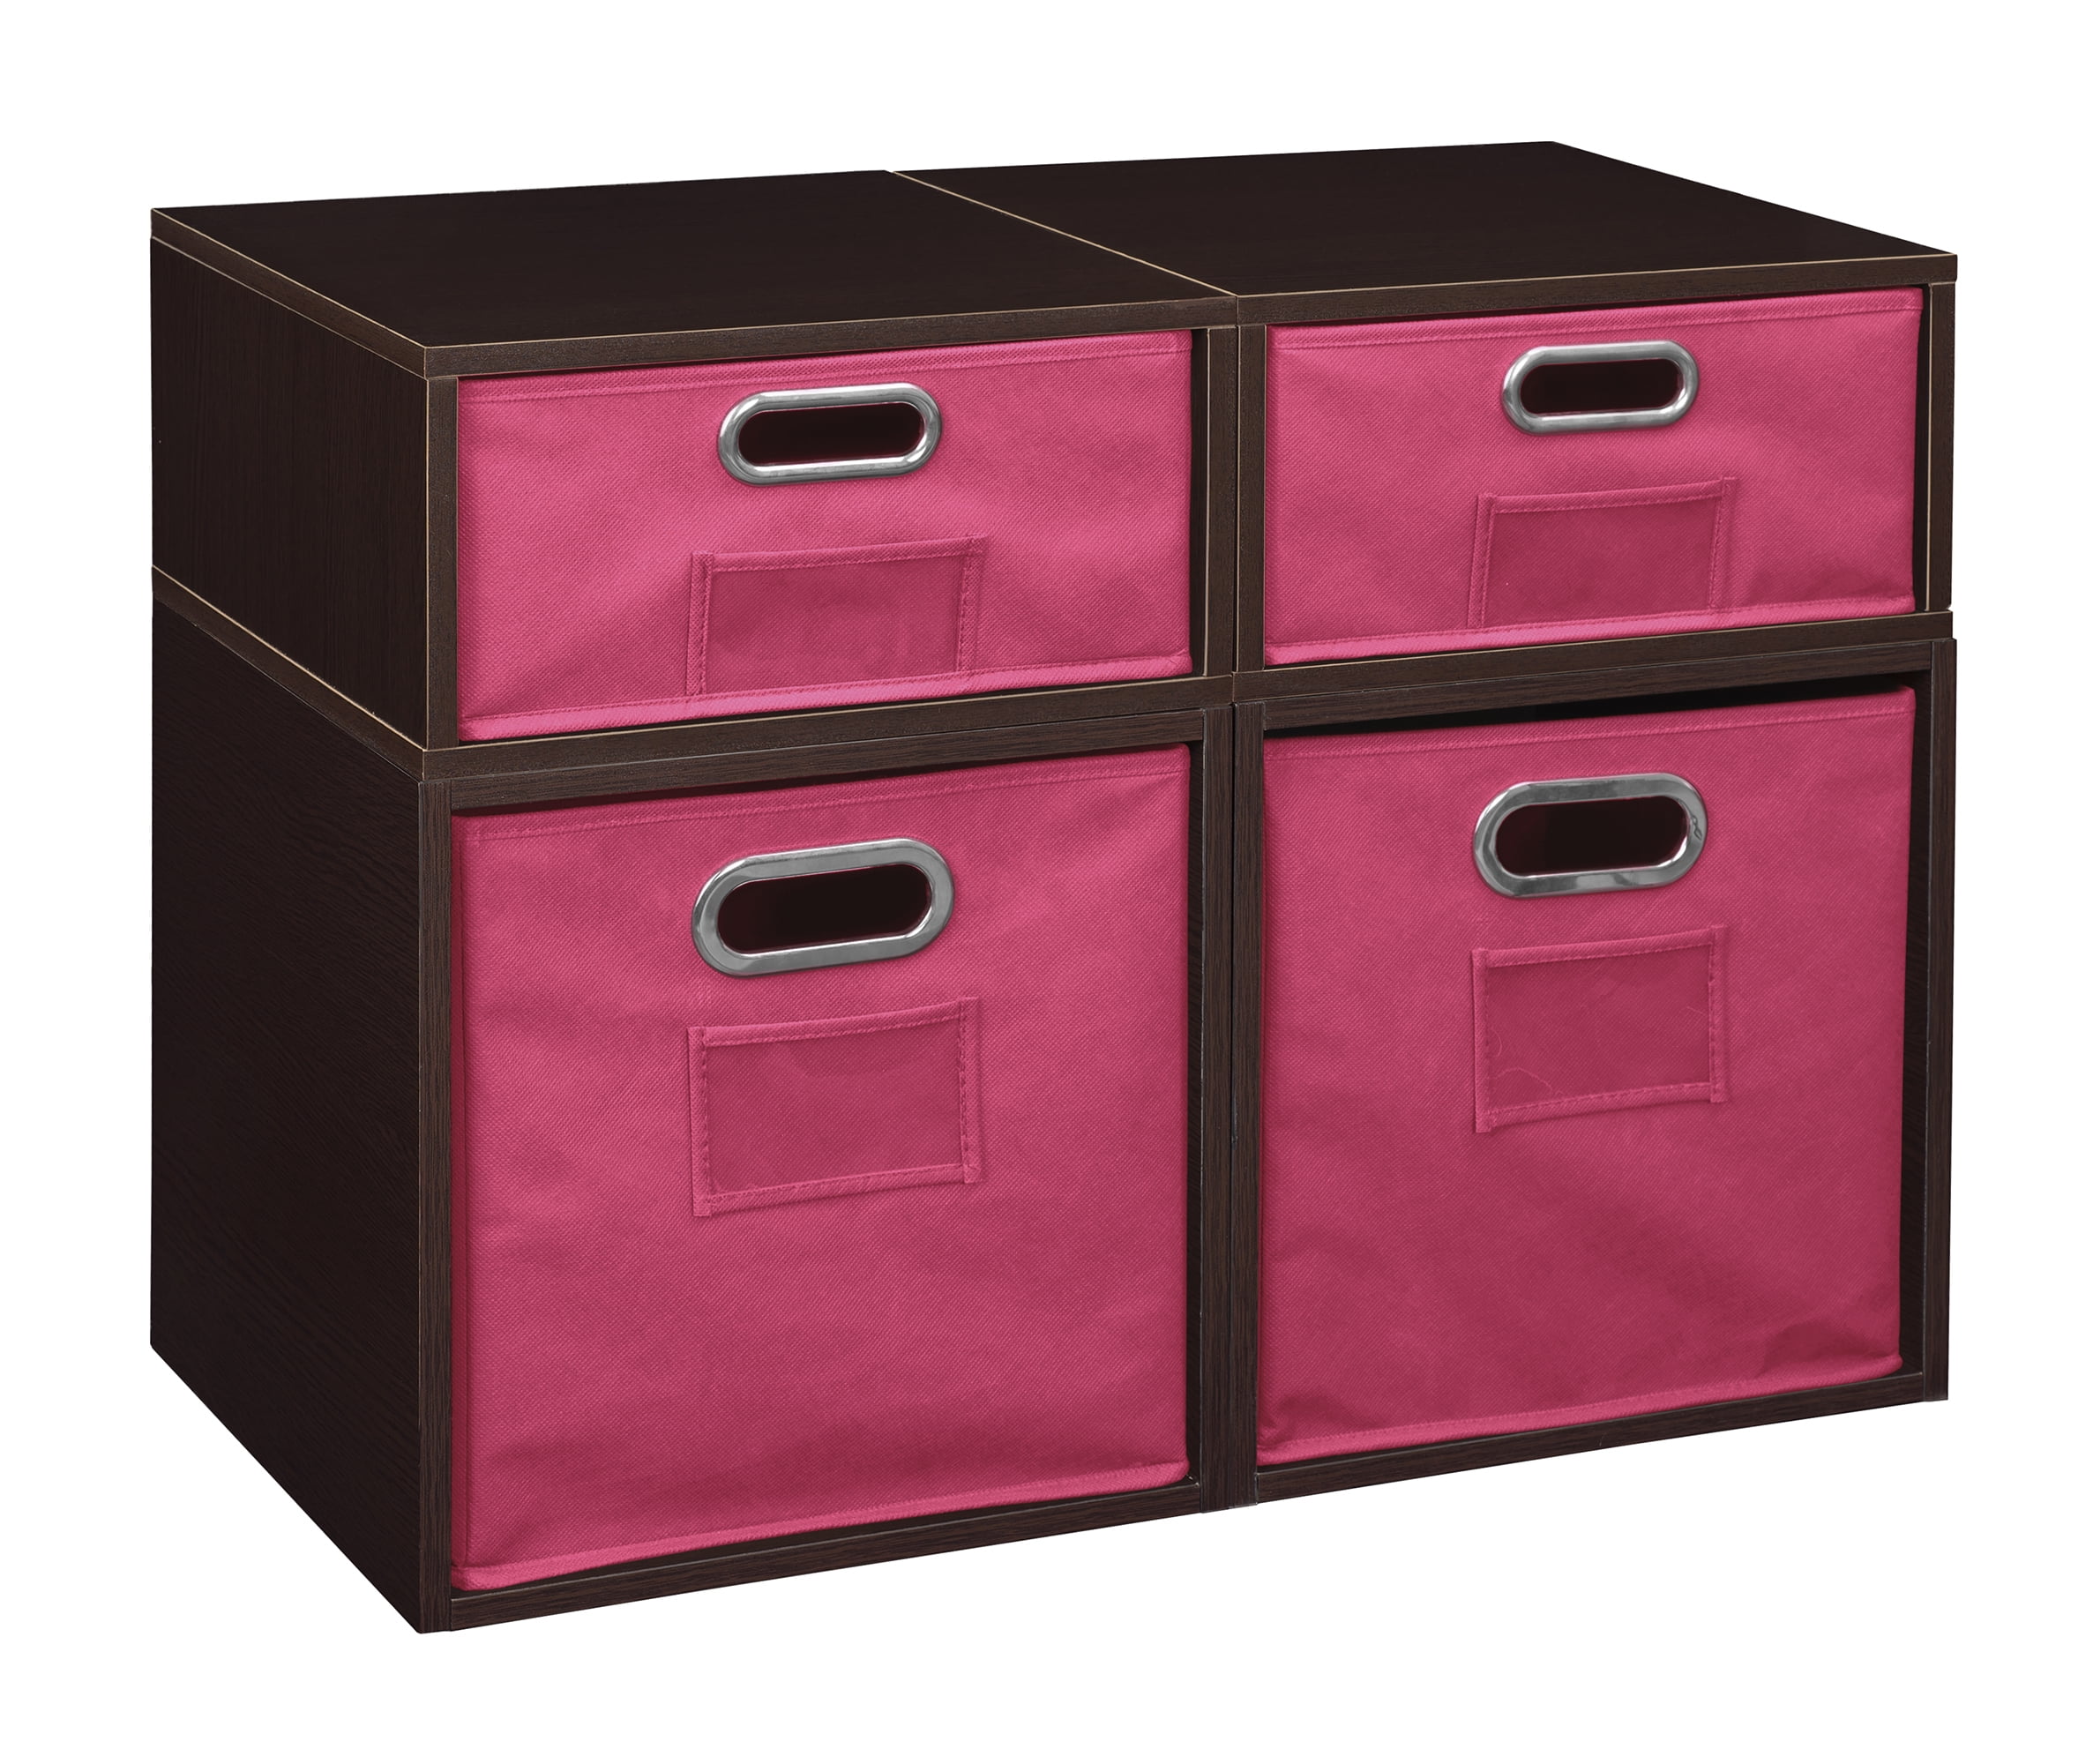 Niche Cubo Storage Set- 2 Full Cubes/2 Half Cubes with Foldable Storage ...